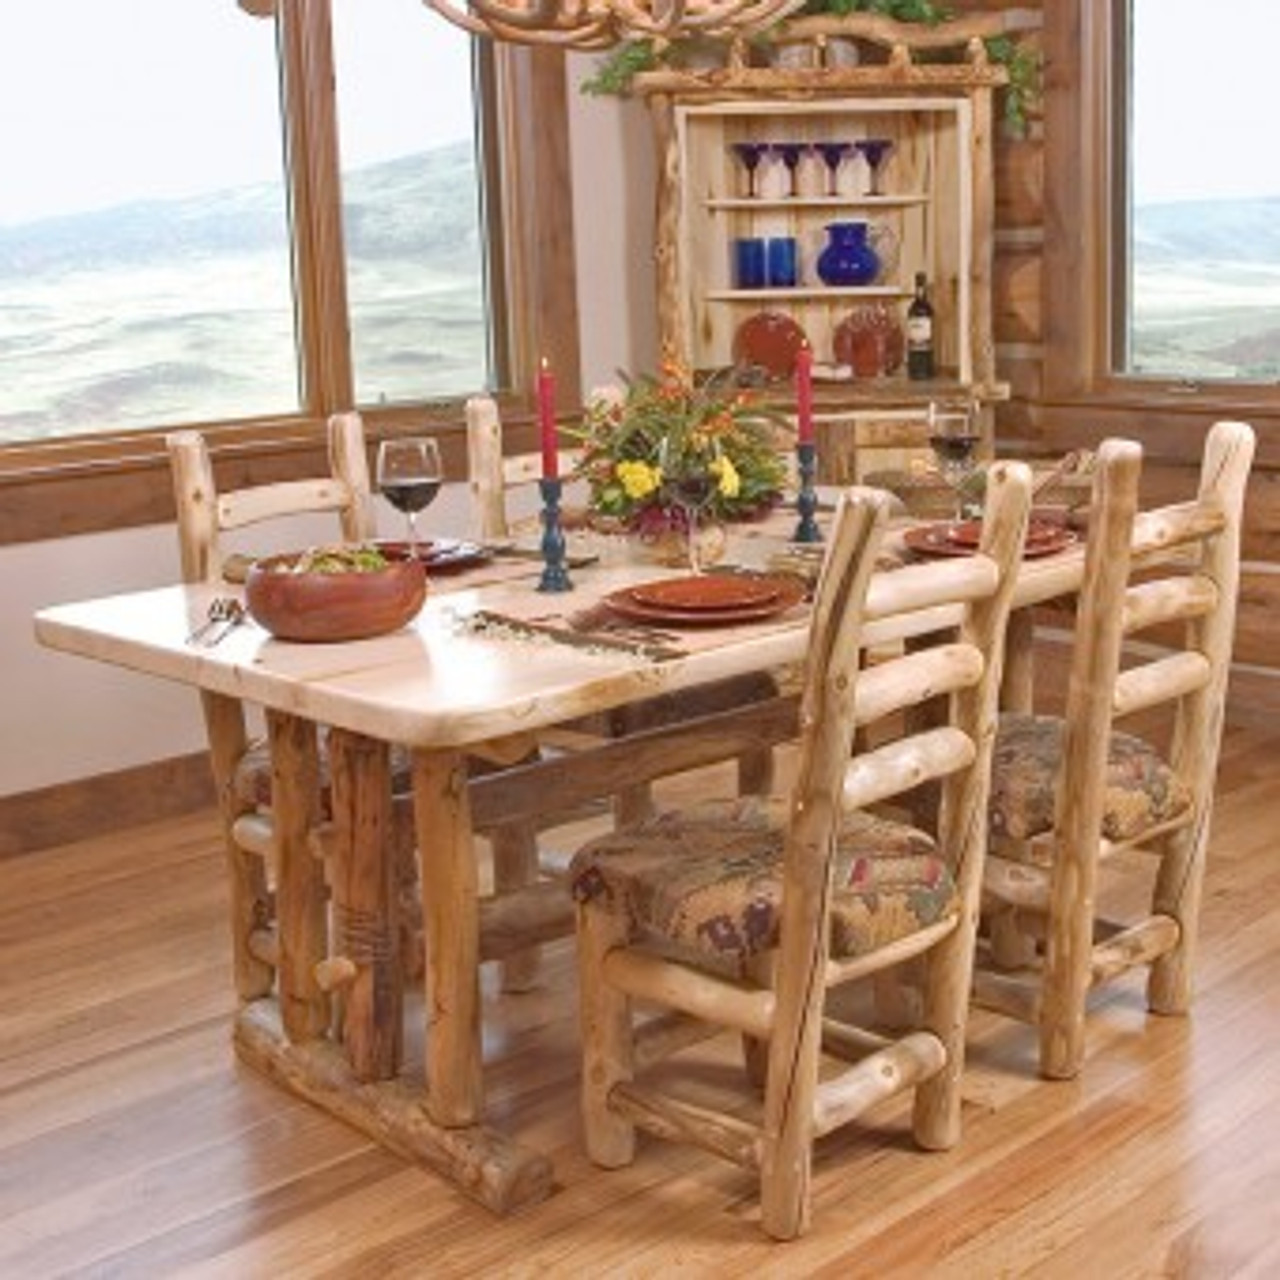 How To Clean a Wood Kitchen Table Naturally - The Homestead Challenge